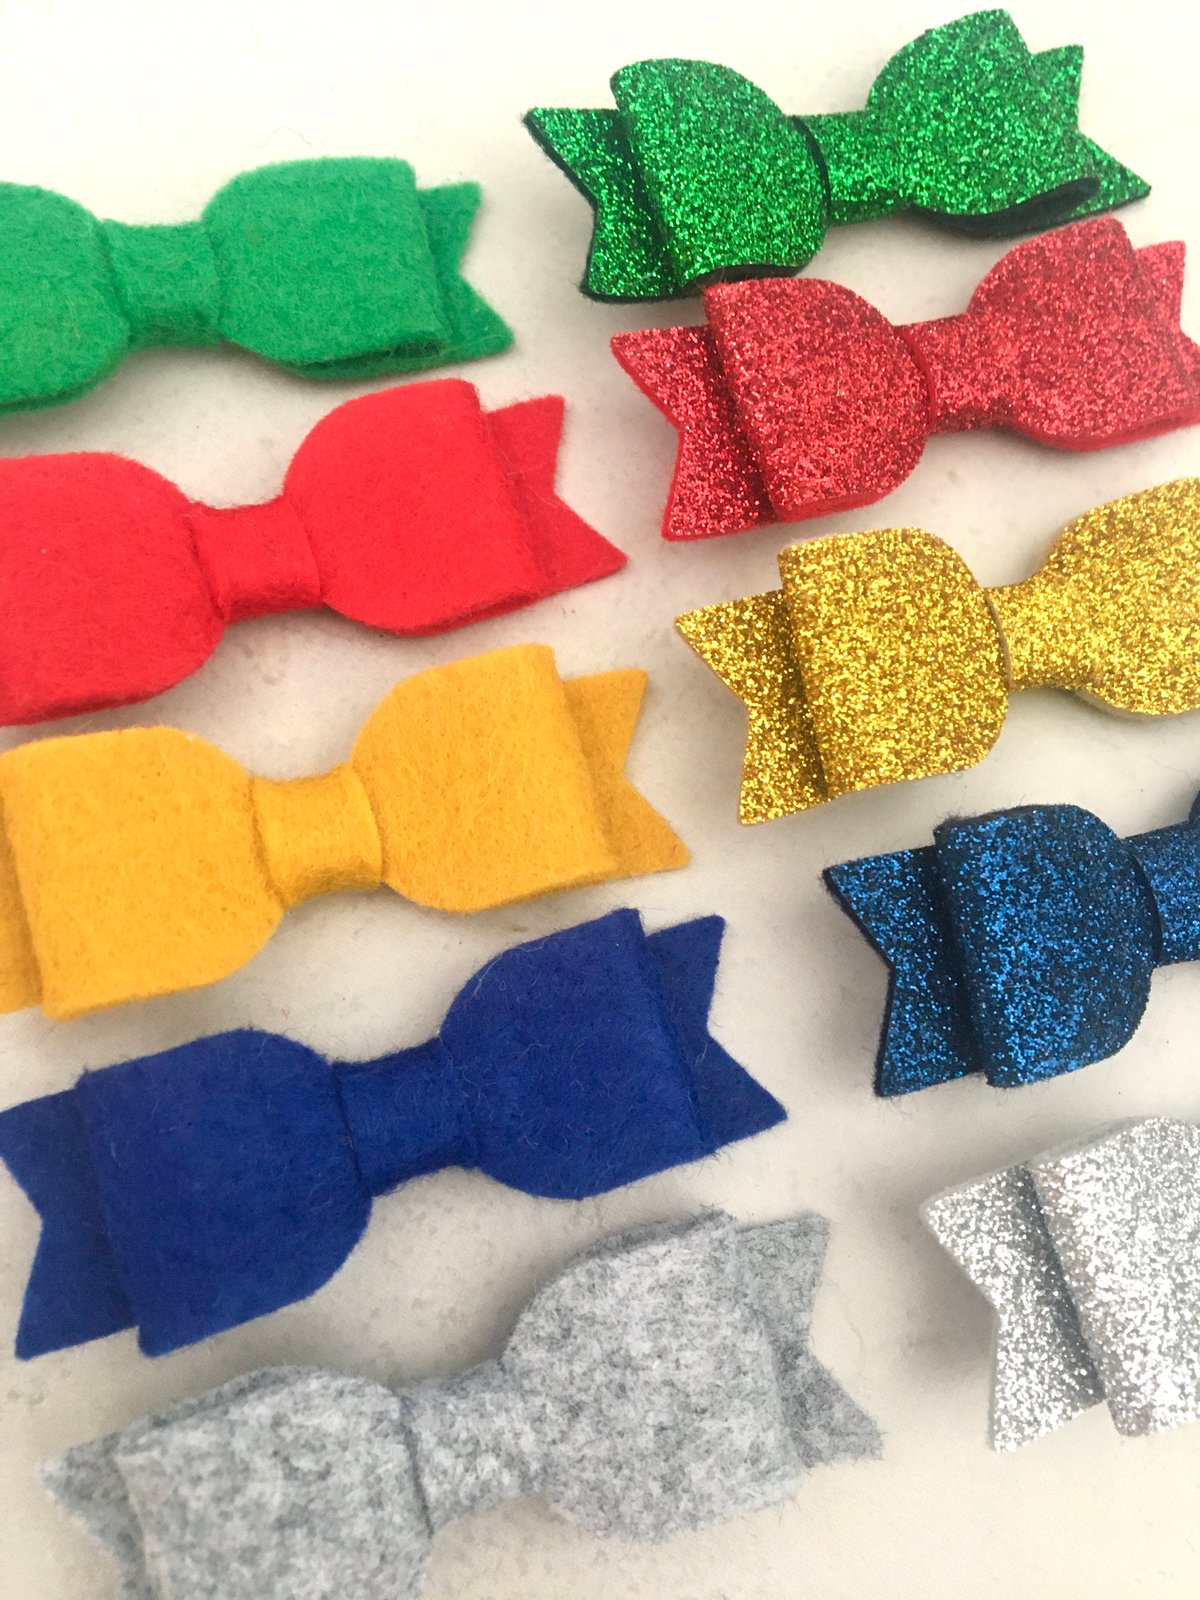 Image of Felt and glitter bows 2 inches on clips 